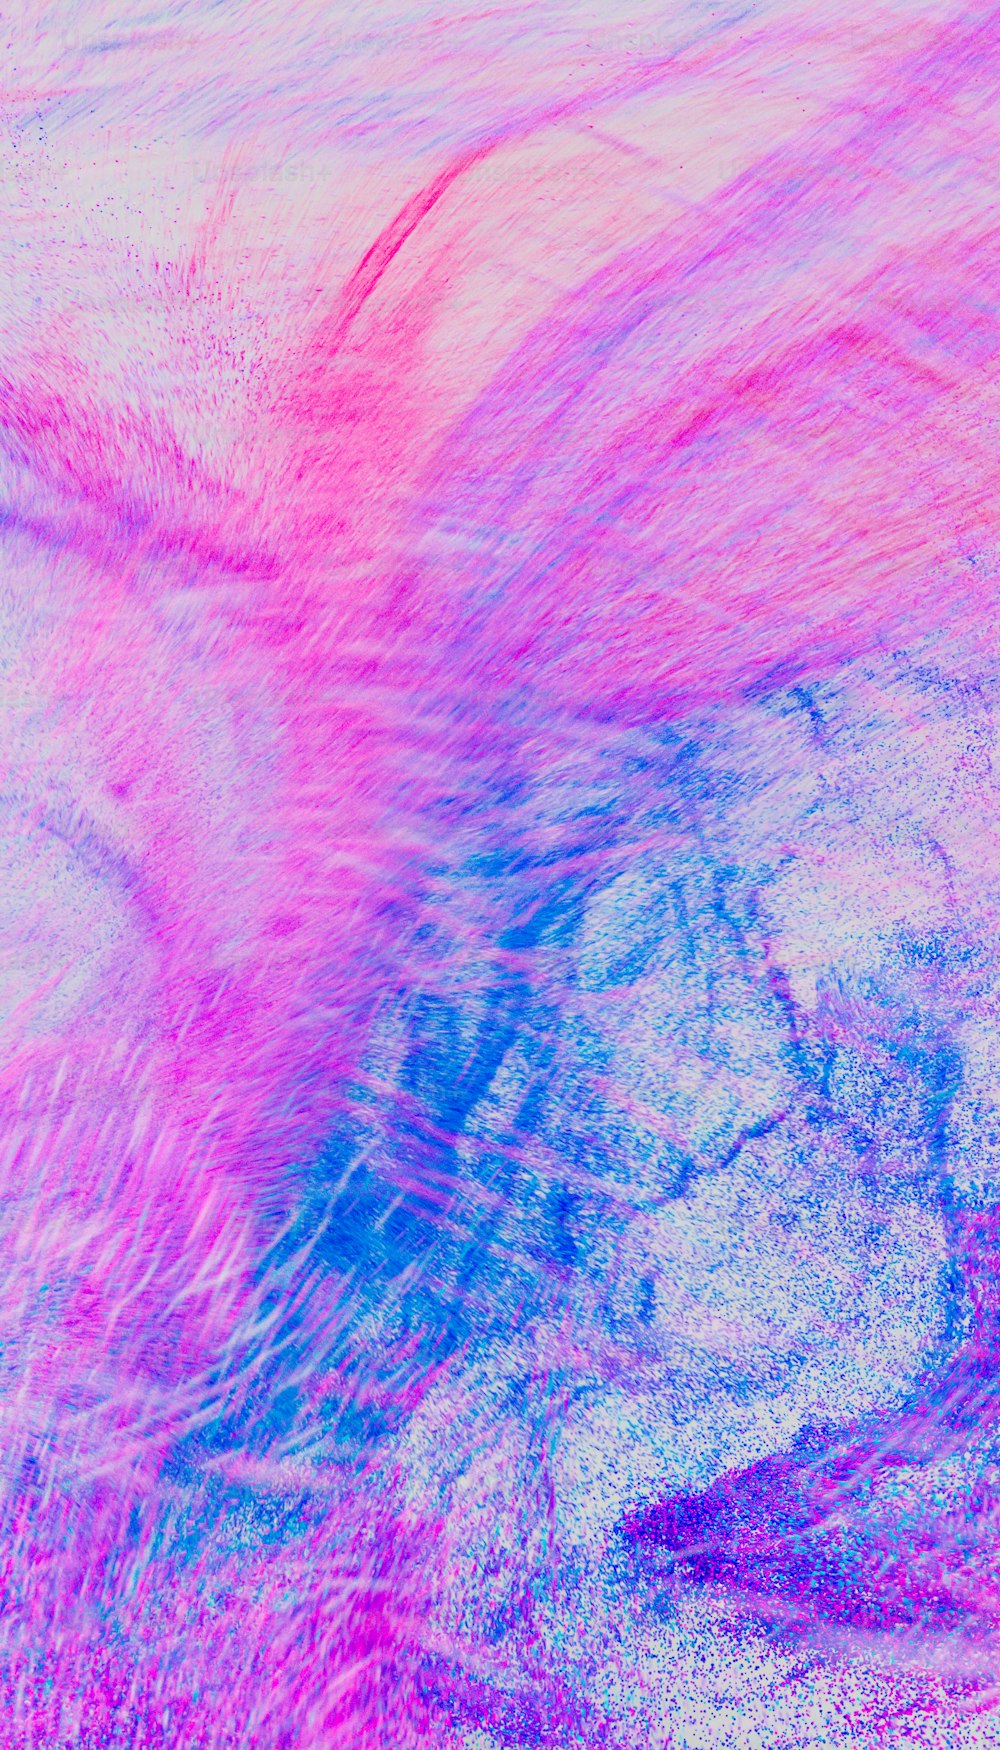 a blurry image of a pink and blue background